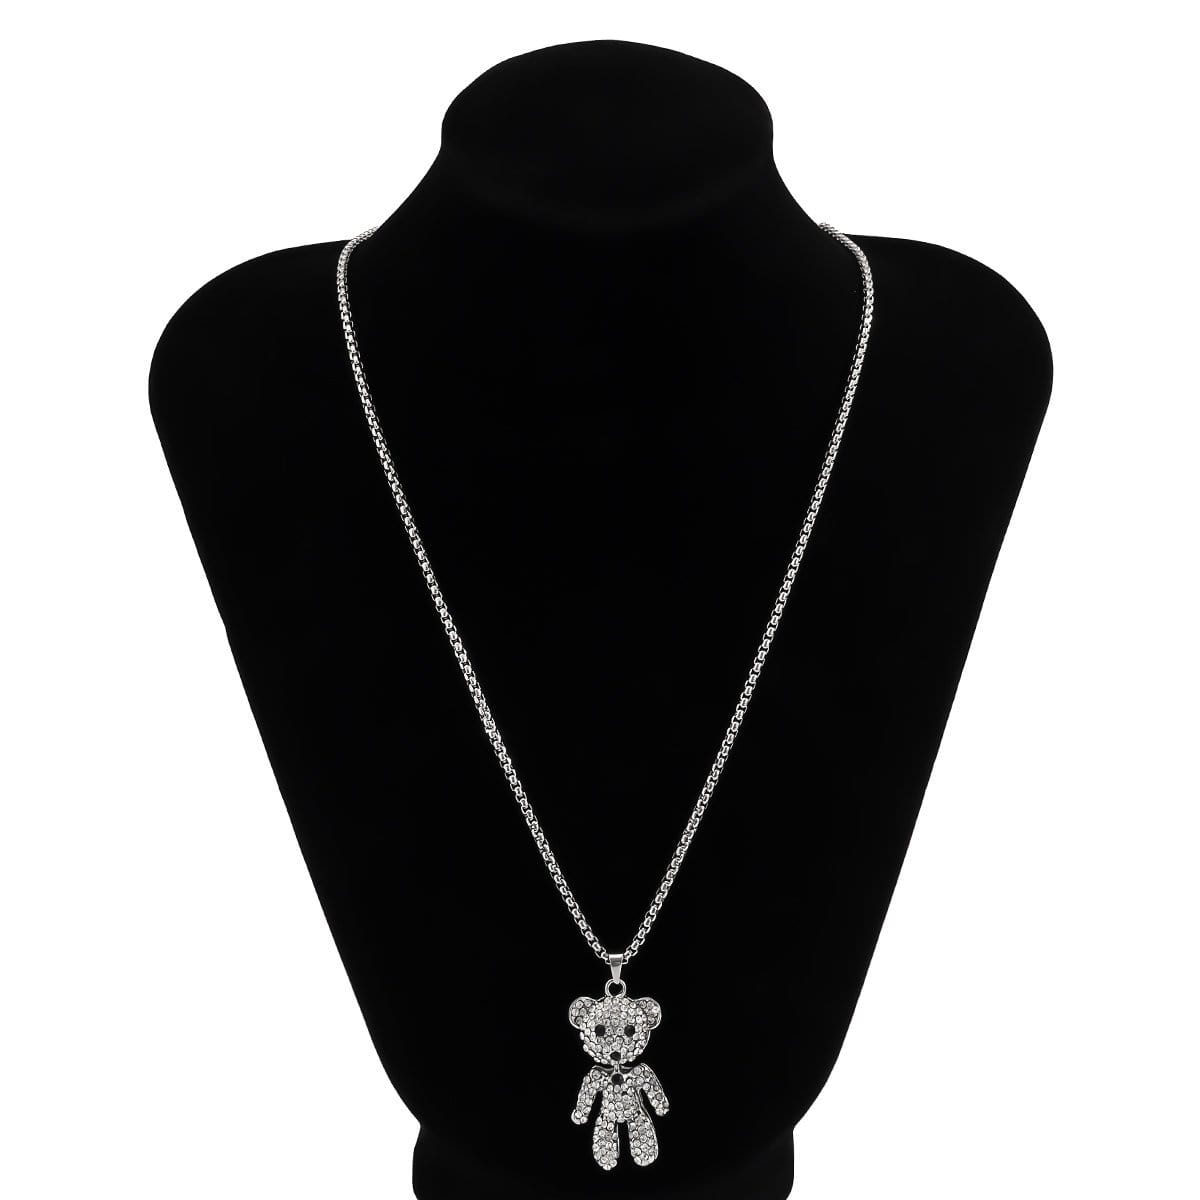 Stainless Steel Iced Out Teddy Bear Pendant Sweater Chain Necklace - ArtGalleryZen